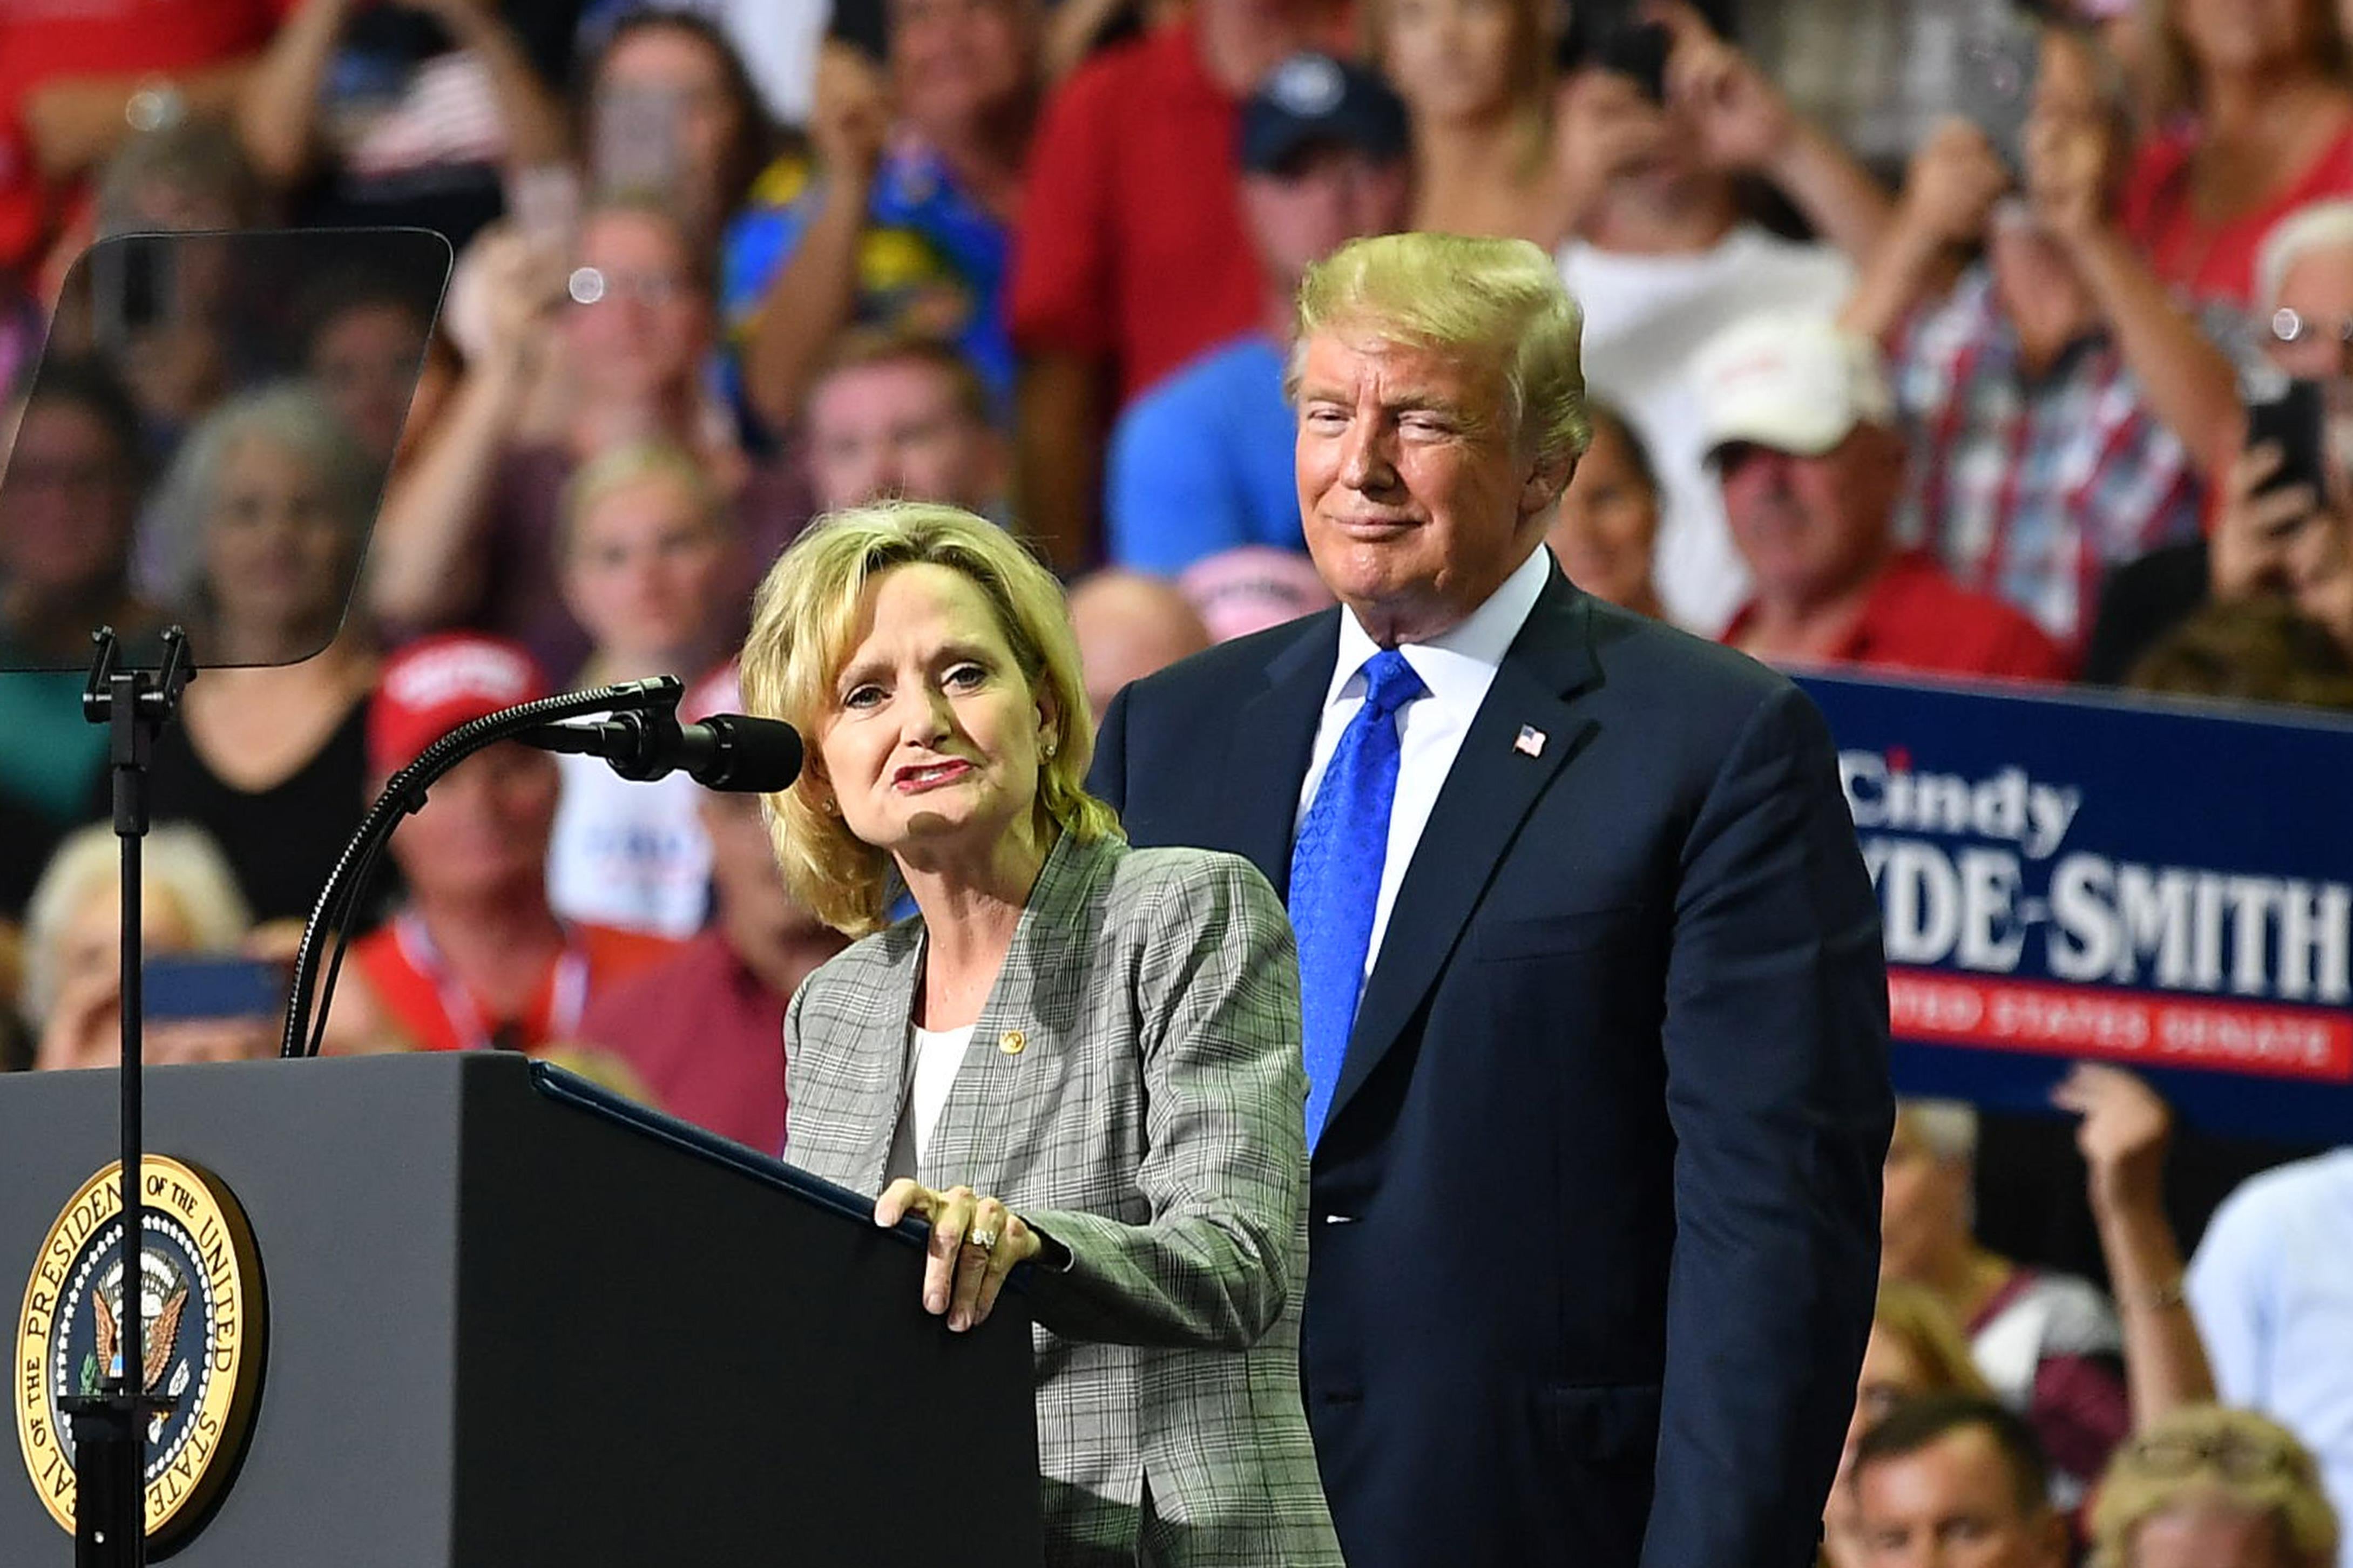 Senator Cindy Hyde-Smith stands on stage with President Donald Trump at Landers Center in Southaven, Mississippi, on October 2, 2018.